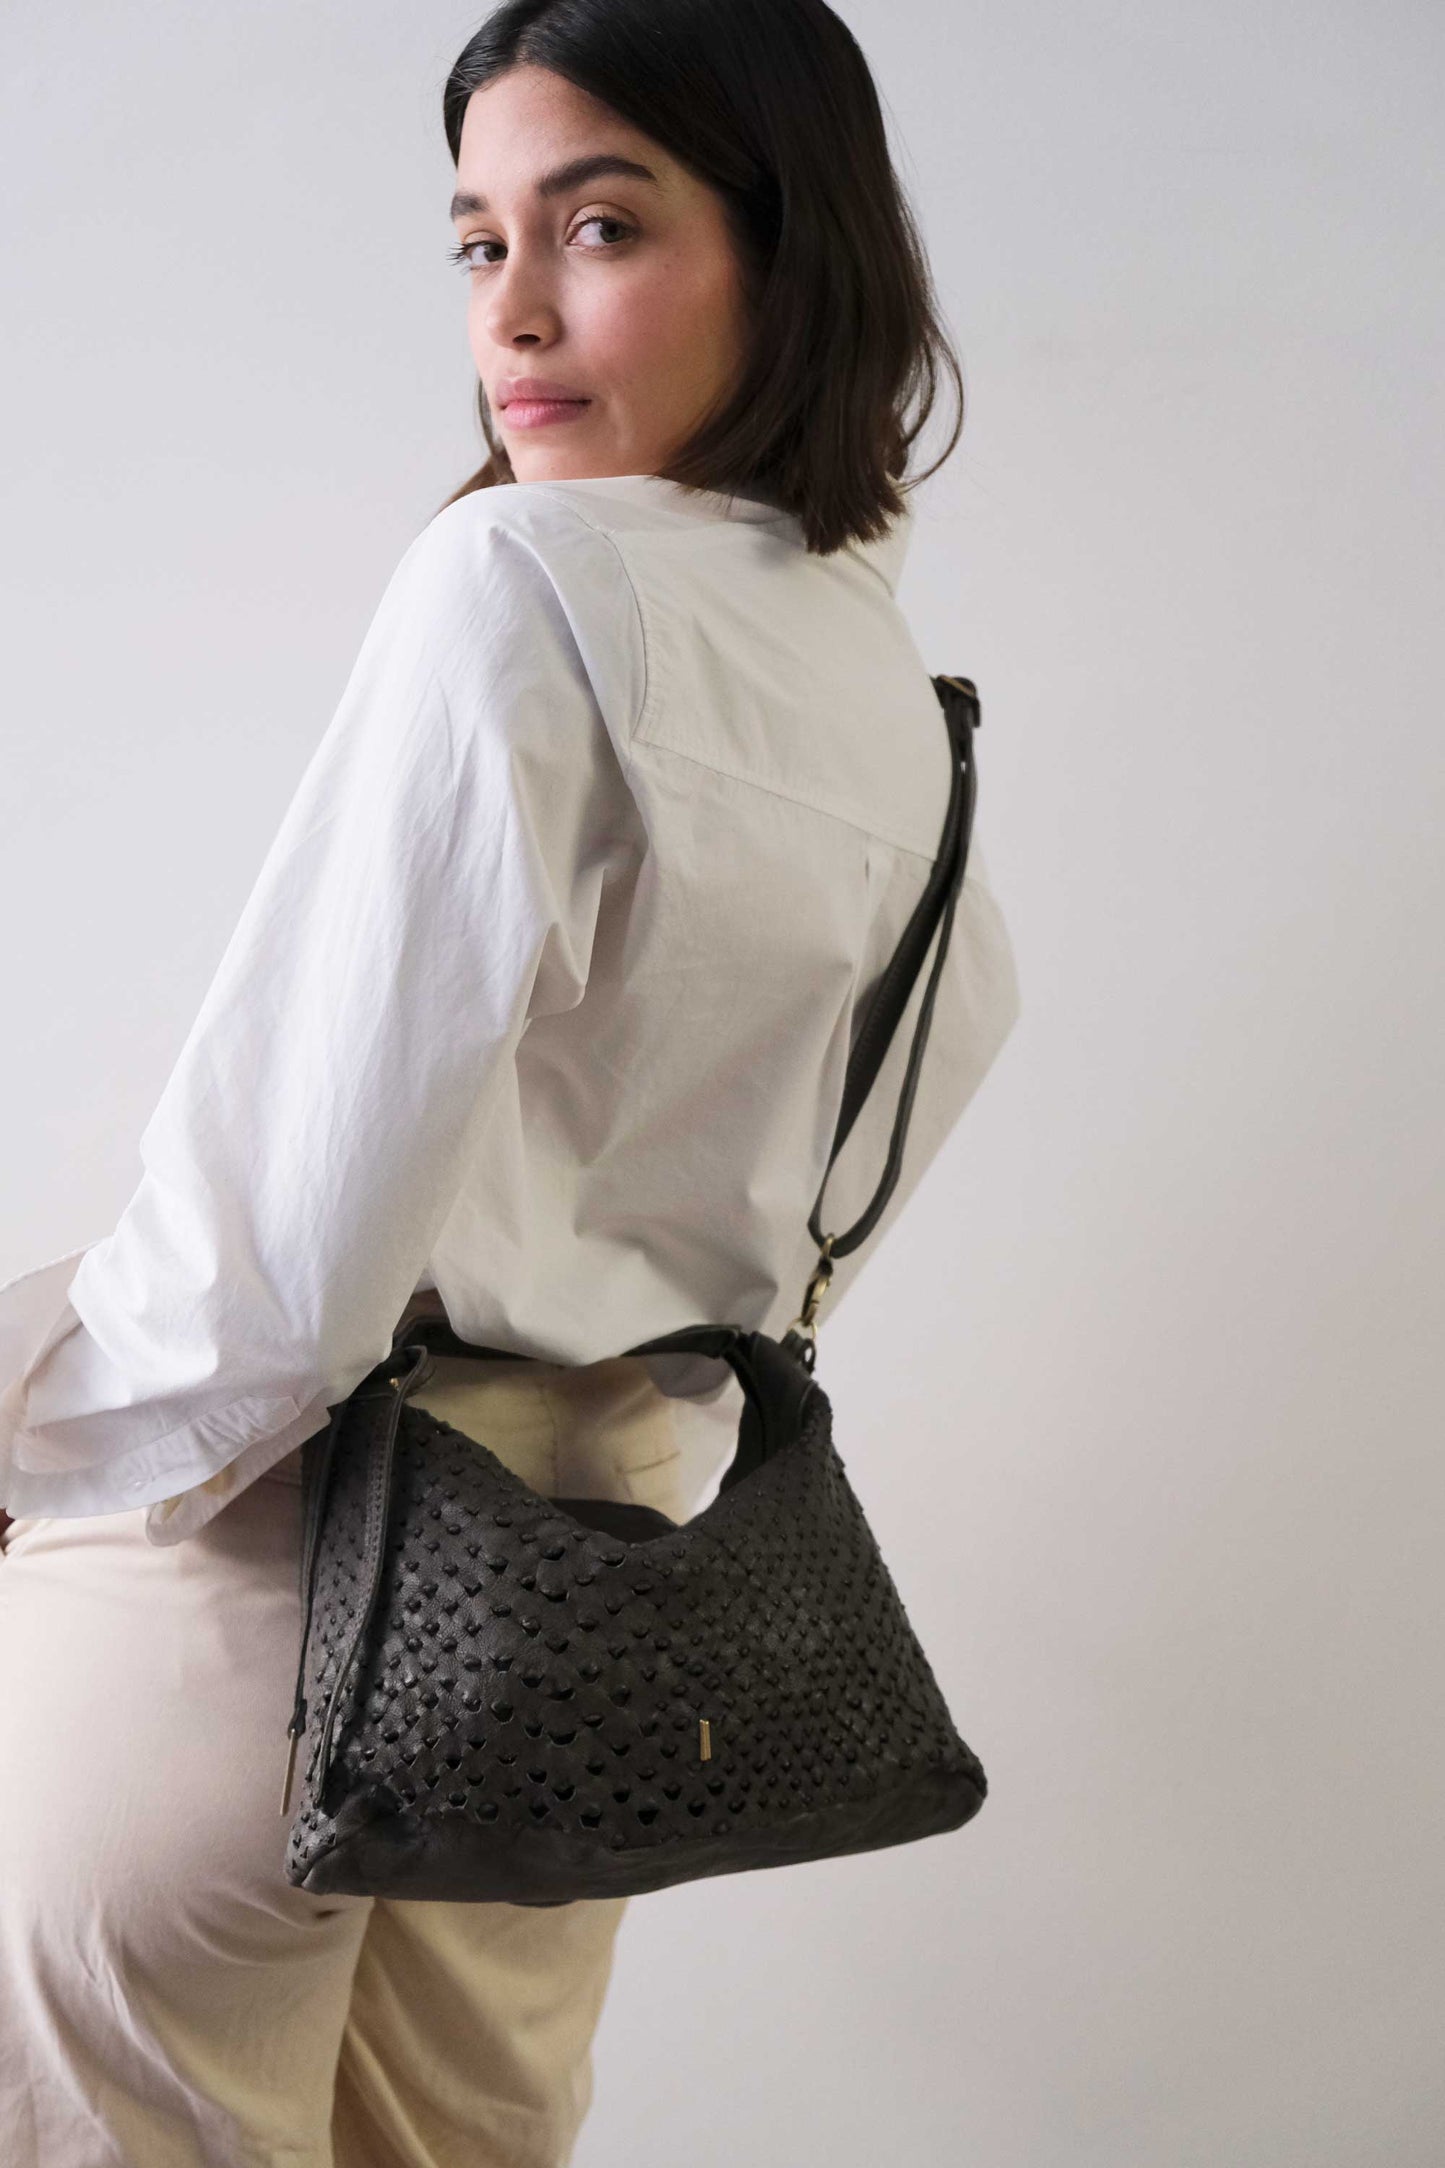 PRE ORDER - discount 15% -Chicca Media hobo bag in grafite perforated nappa- use code PREORDER15- DELIVERY END OF MAY